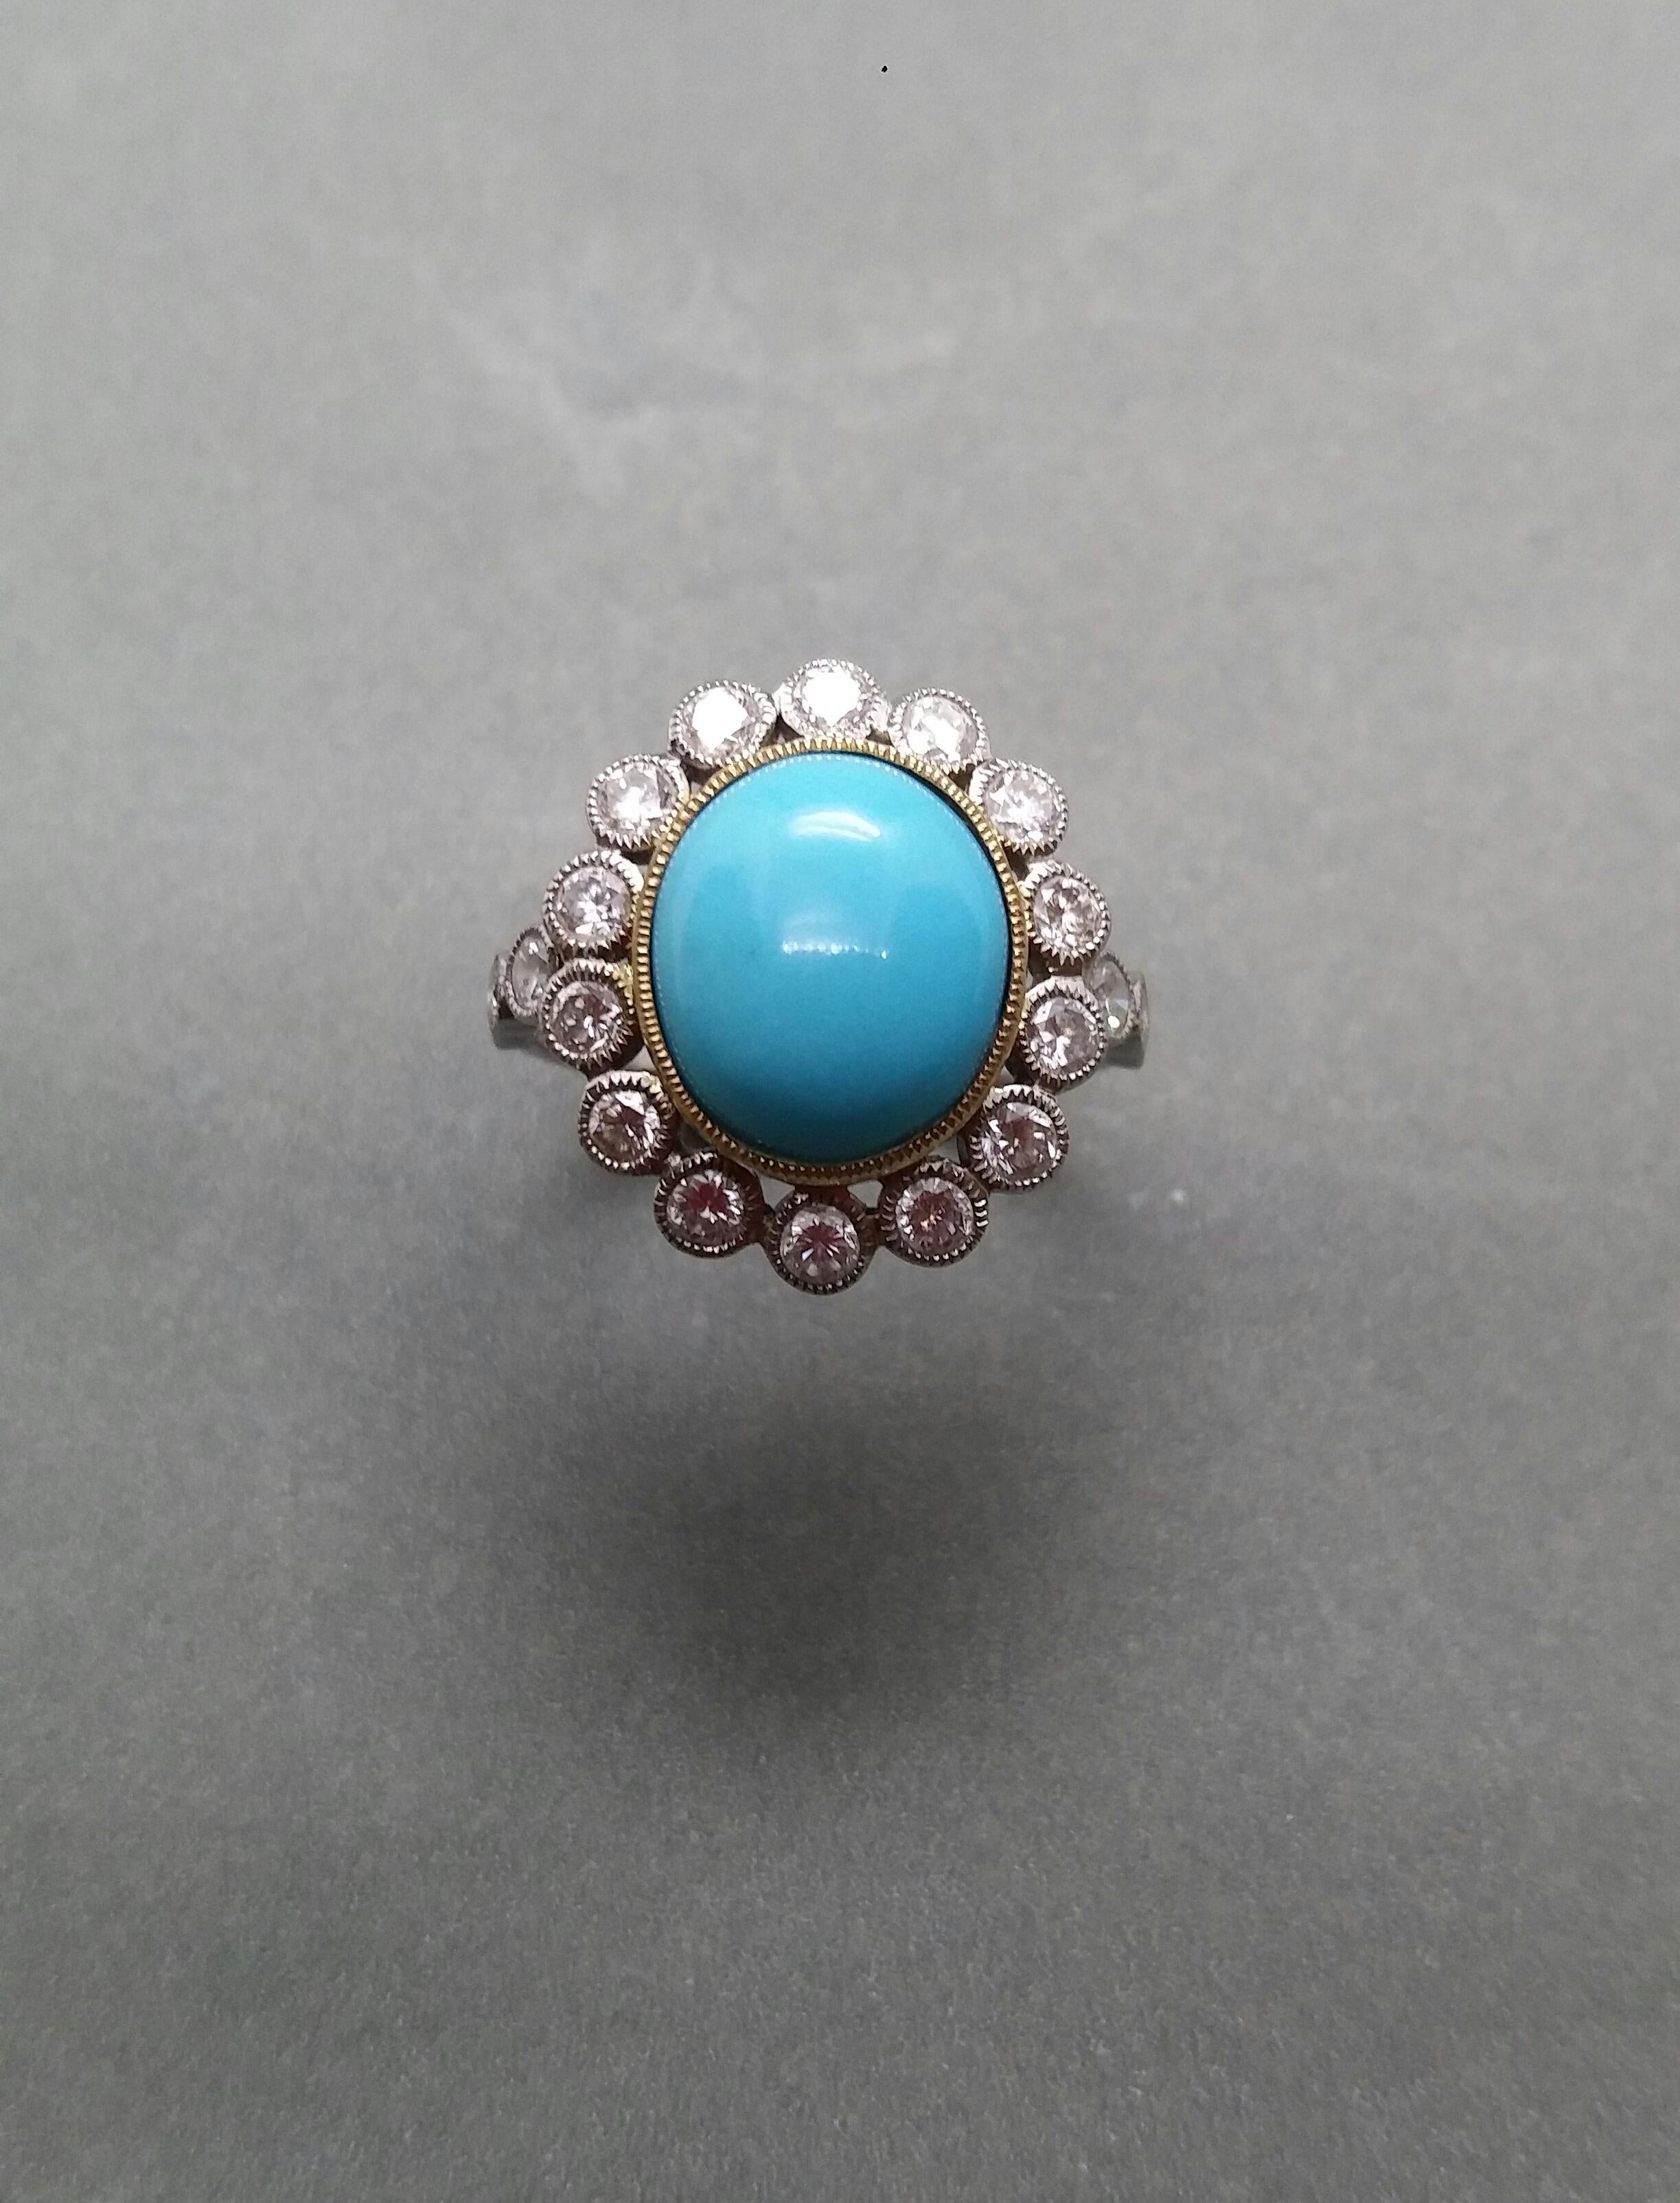 Classic ring with an oval Turquoise measuring 10x12 mm. set in a yellow gold bezel and surrounded by 14 full cut round diamonds of 0,06 cts each set in 14 kt white gold. Each side of the shank has 3 full cut diamonds set in 14 kt white gold.

In